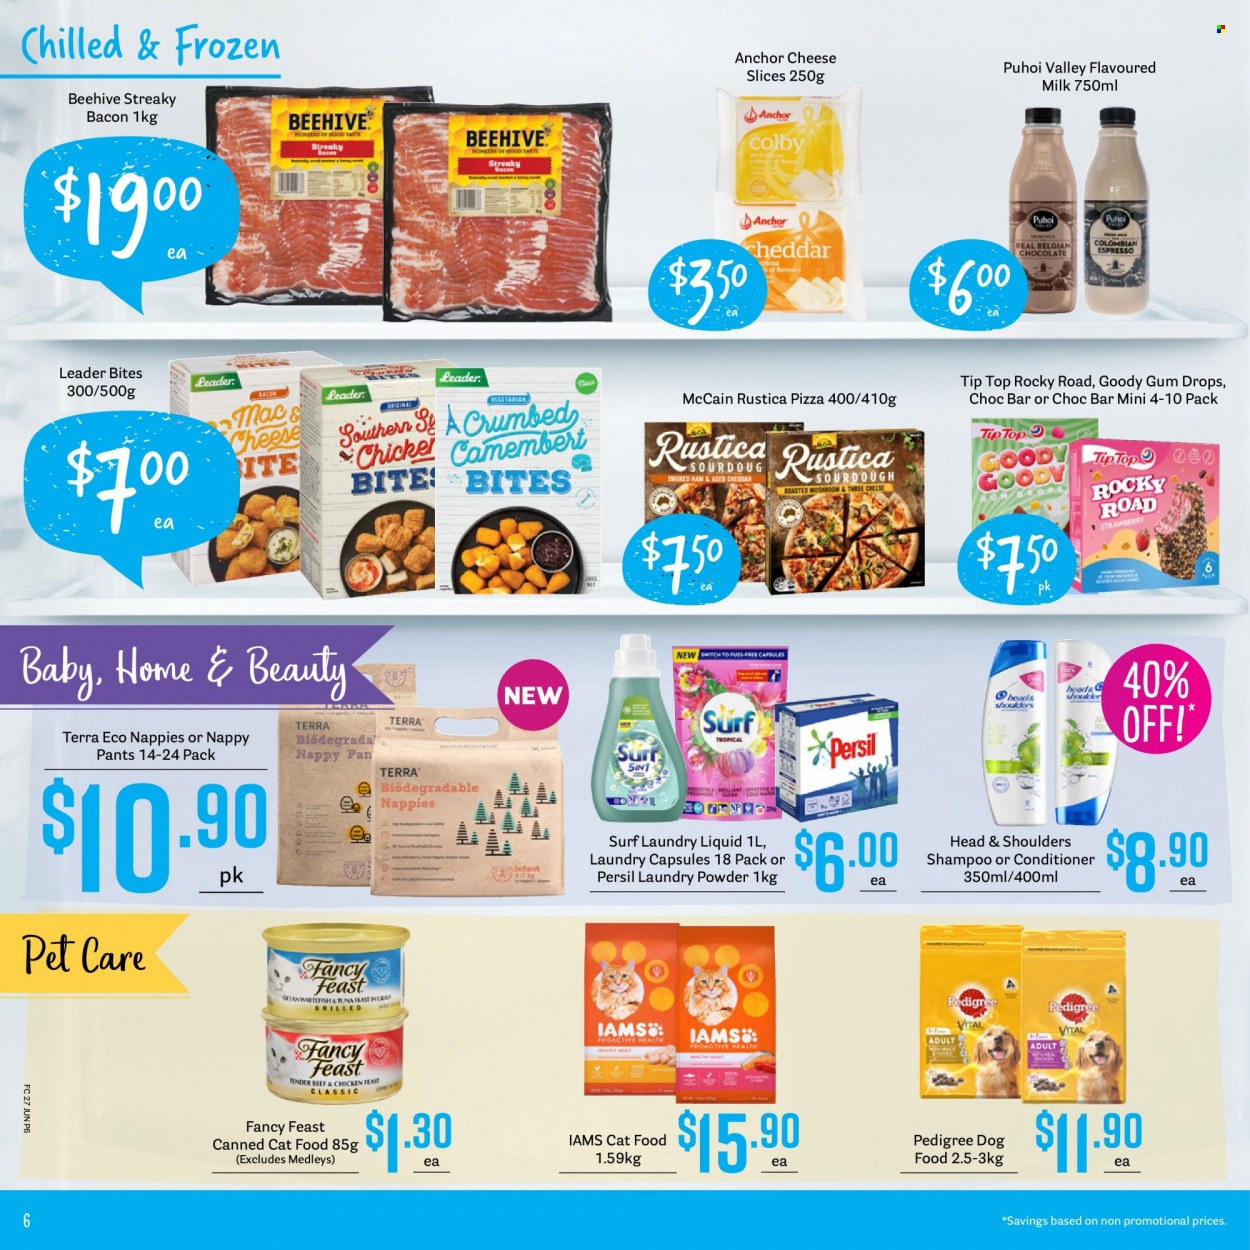 thumbnail - Fresh Choice mailer - 27.06.2022 - 03.07.2022 - Sales products - Tip Top, pizza, bacon, ham, smoked ham, streaky bacon, camembert, Colby cheese, sliced cheese, cheddar, milk, flavoured milk, Anchor, McCain, chocolate, switch, pants, nappies, Persil, laundry detergent, laundry powder, laundry capsules, Surf, shampoo, conditioner, Head & Shoulders, animal food, cat food, dog food, Pedigree, Fancy Feast, Iams. Page 6.